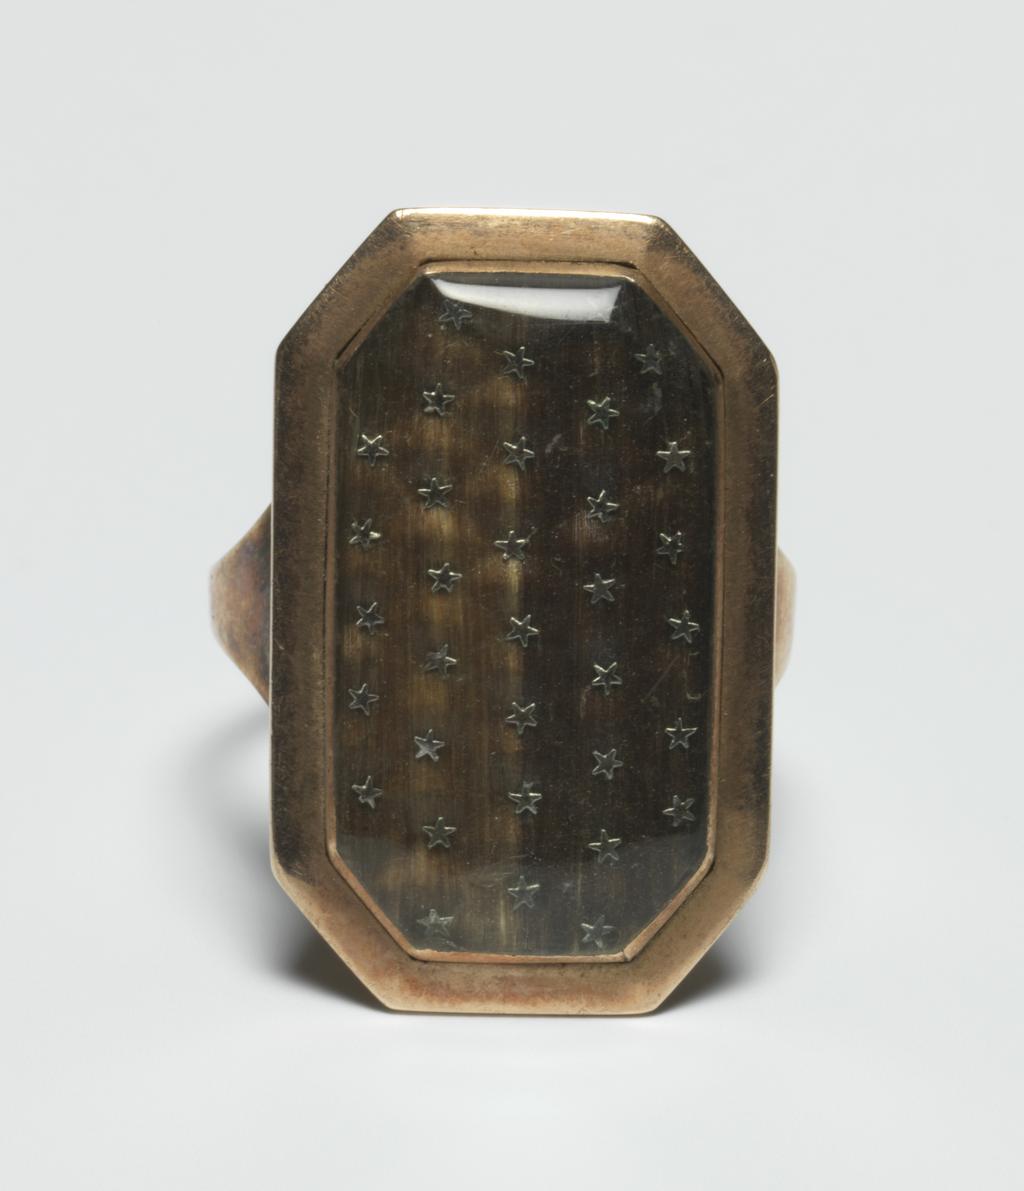 An image of Jewellery. Ring/Mourning Ring. Gilt-metal, plain, narrow hoop, broadening at shoulders. Long octagonal bezel, containing under glass, hair of two different colours set with rows of small metal stars. Inscribed on the back: 'NB Toms Ob 19 Dec 1794 At 5ys W: Toms ob: 28 Mars 1786 Aet 11 ys'. Height, hoop, 1.5 mm, depth, hoop, 1.0 mm, length, hoop, 21.0, mm, height. bezel, 27.0 mm, length, bezel, 17.0 mm, width, bezel, 4.5 mm, 1786. English.